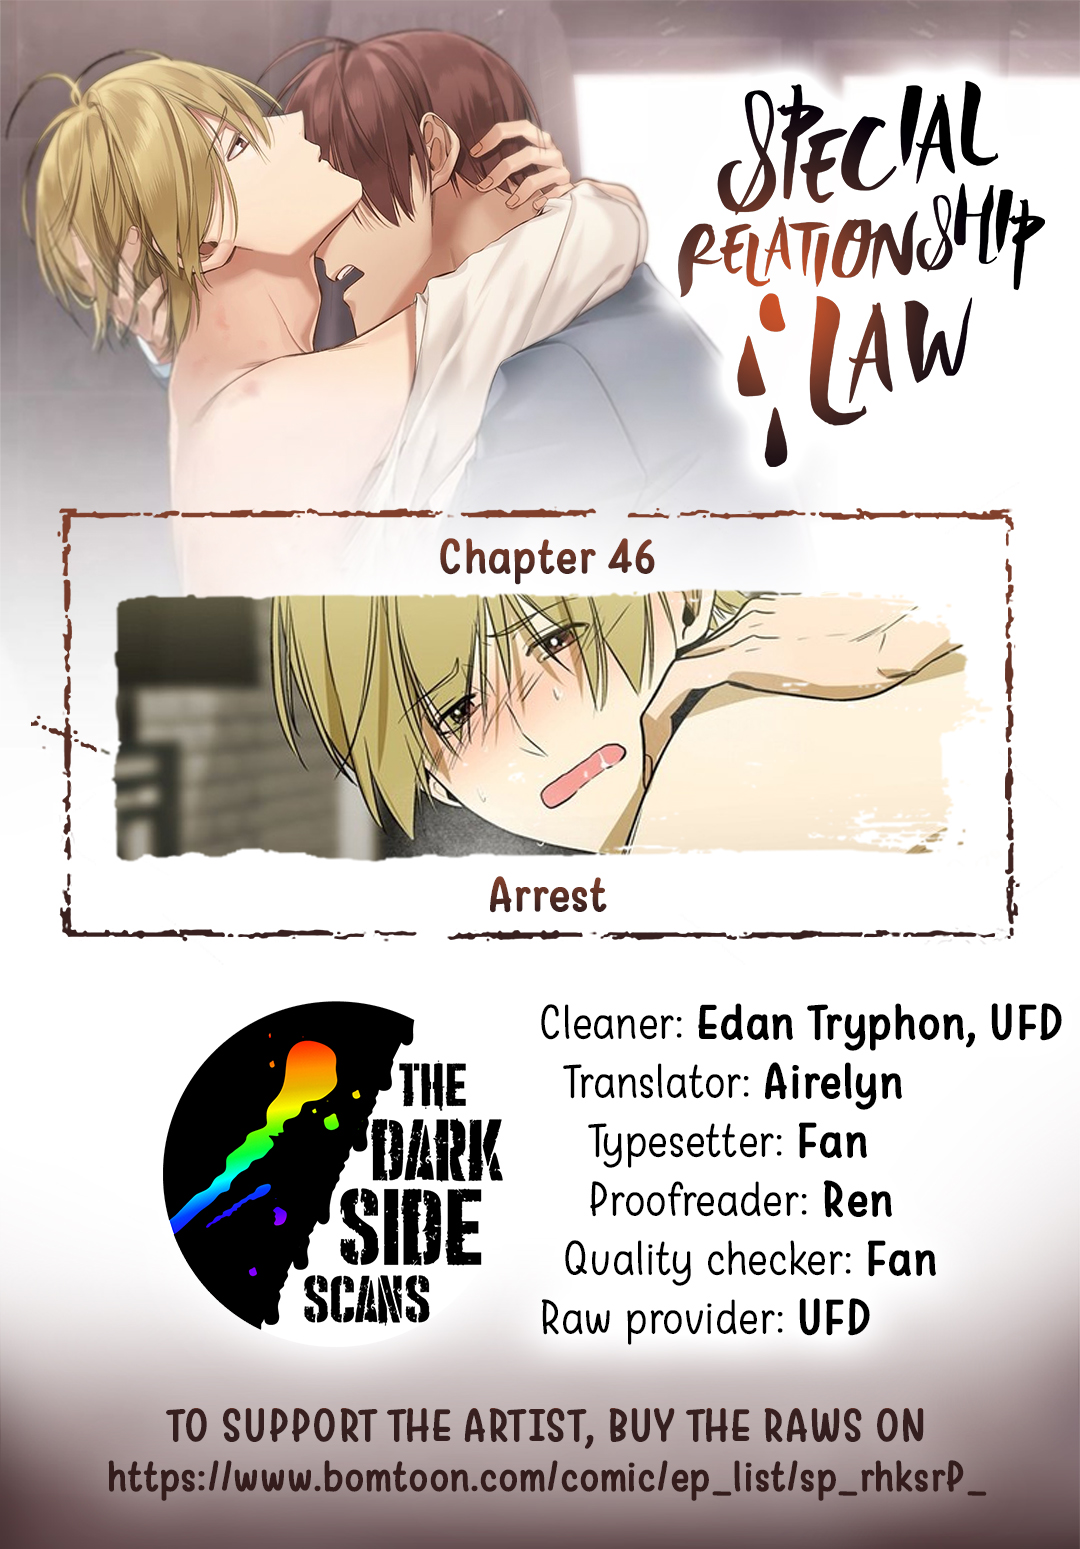 Special Relationship Law Ch. 46 Arrest